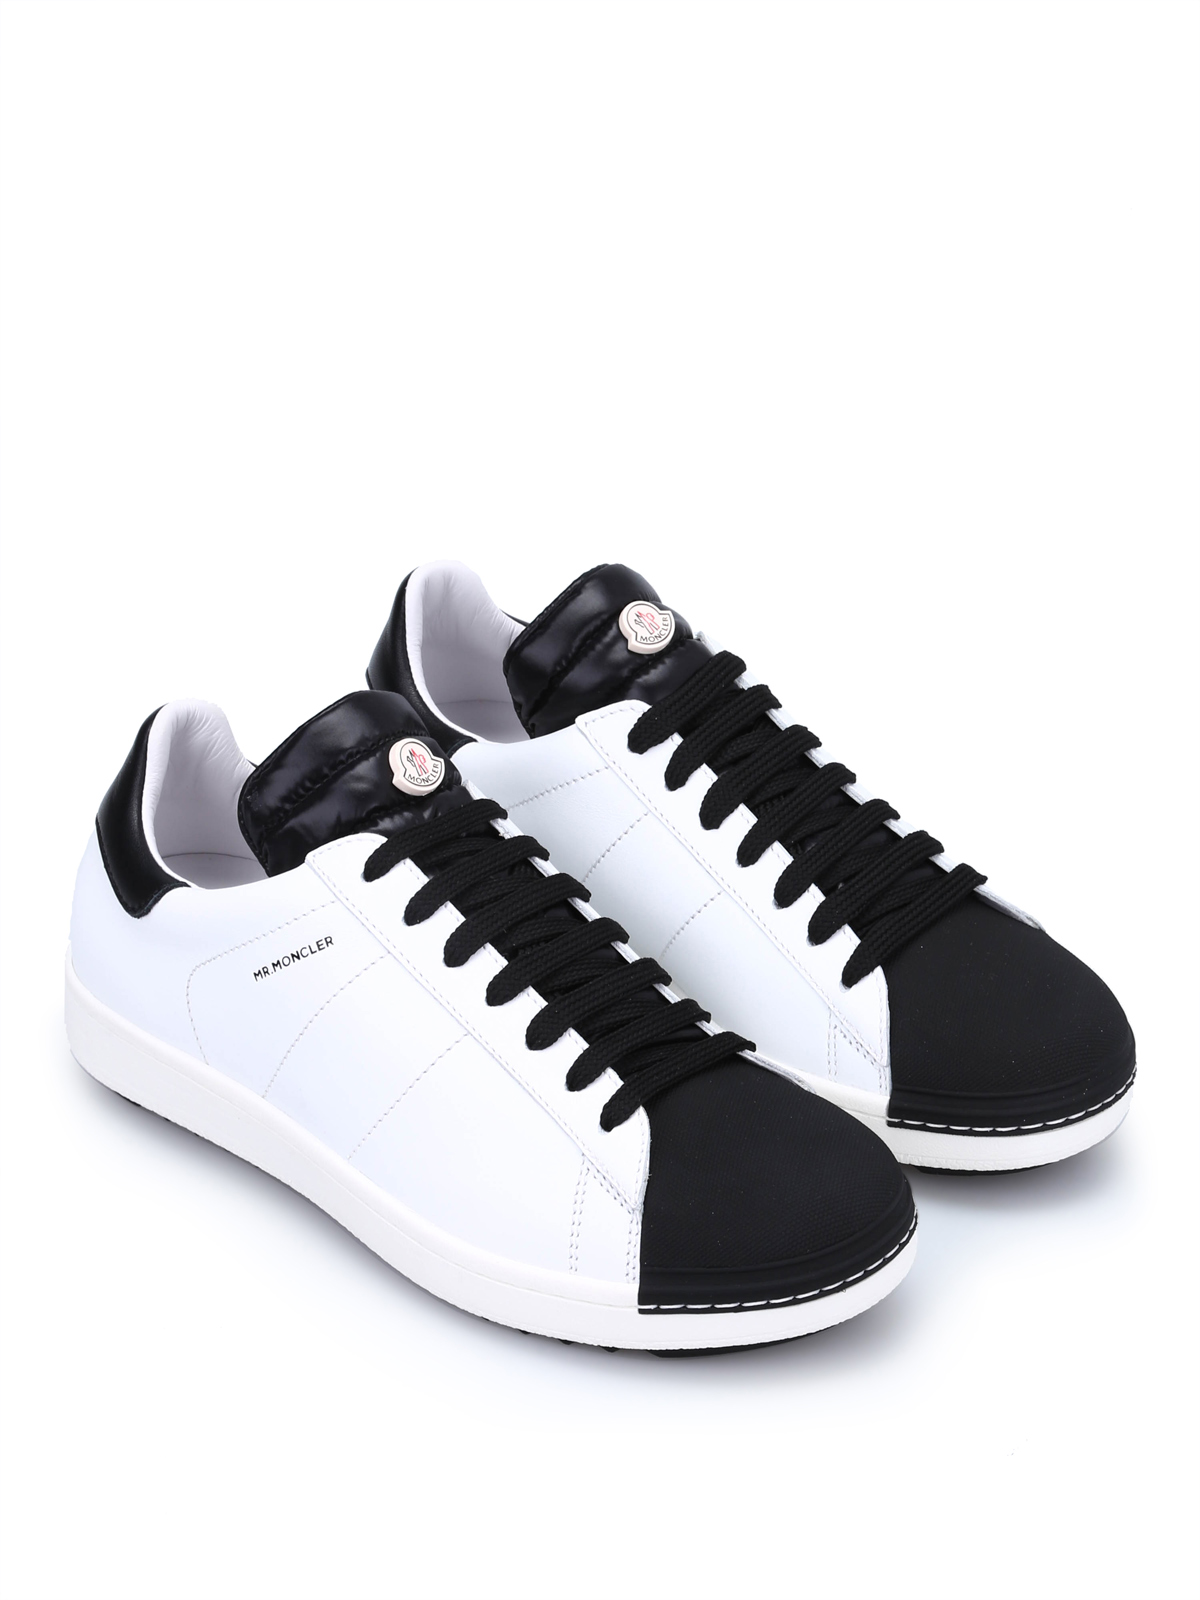 moncler-trainers-online-joachim-sneakers